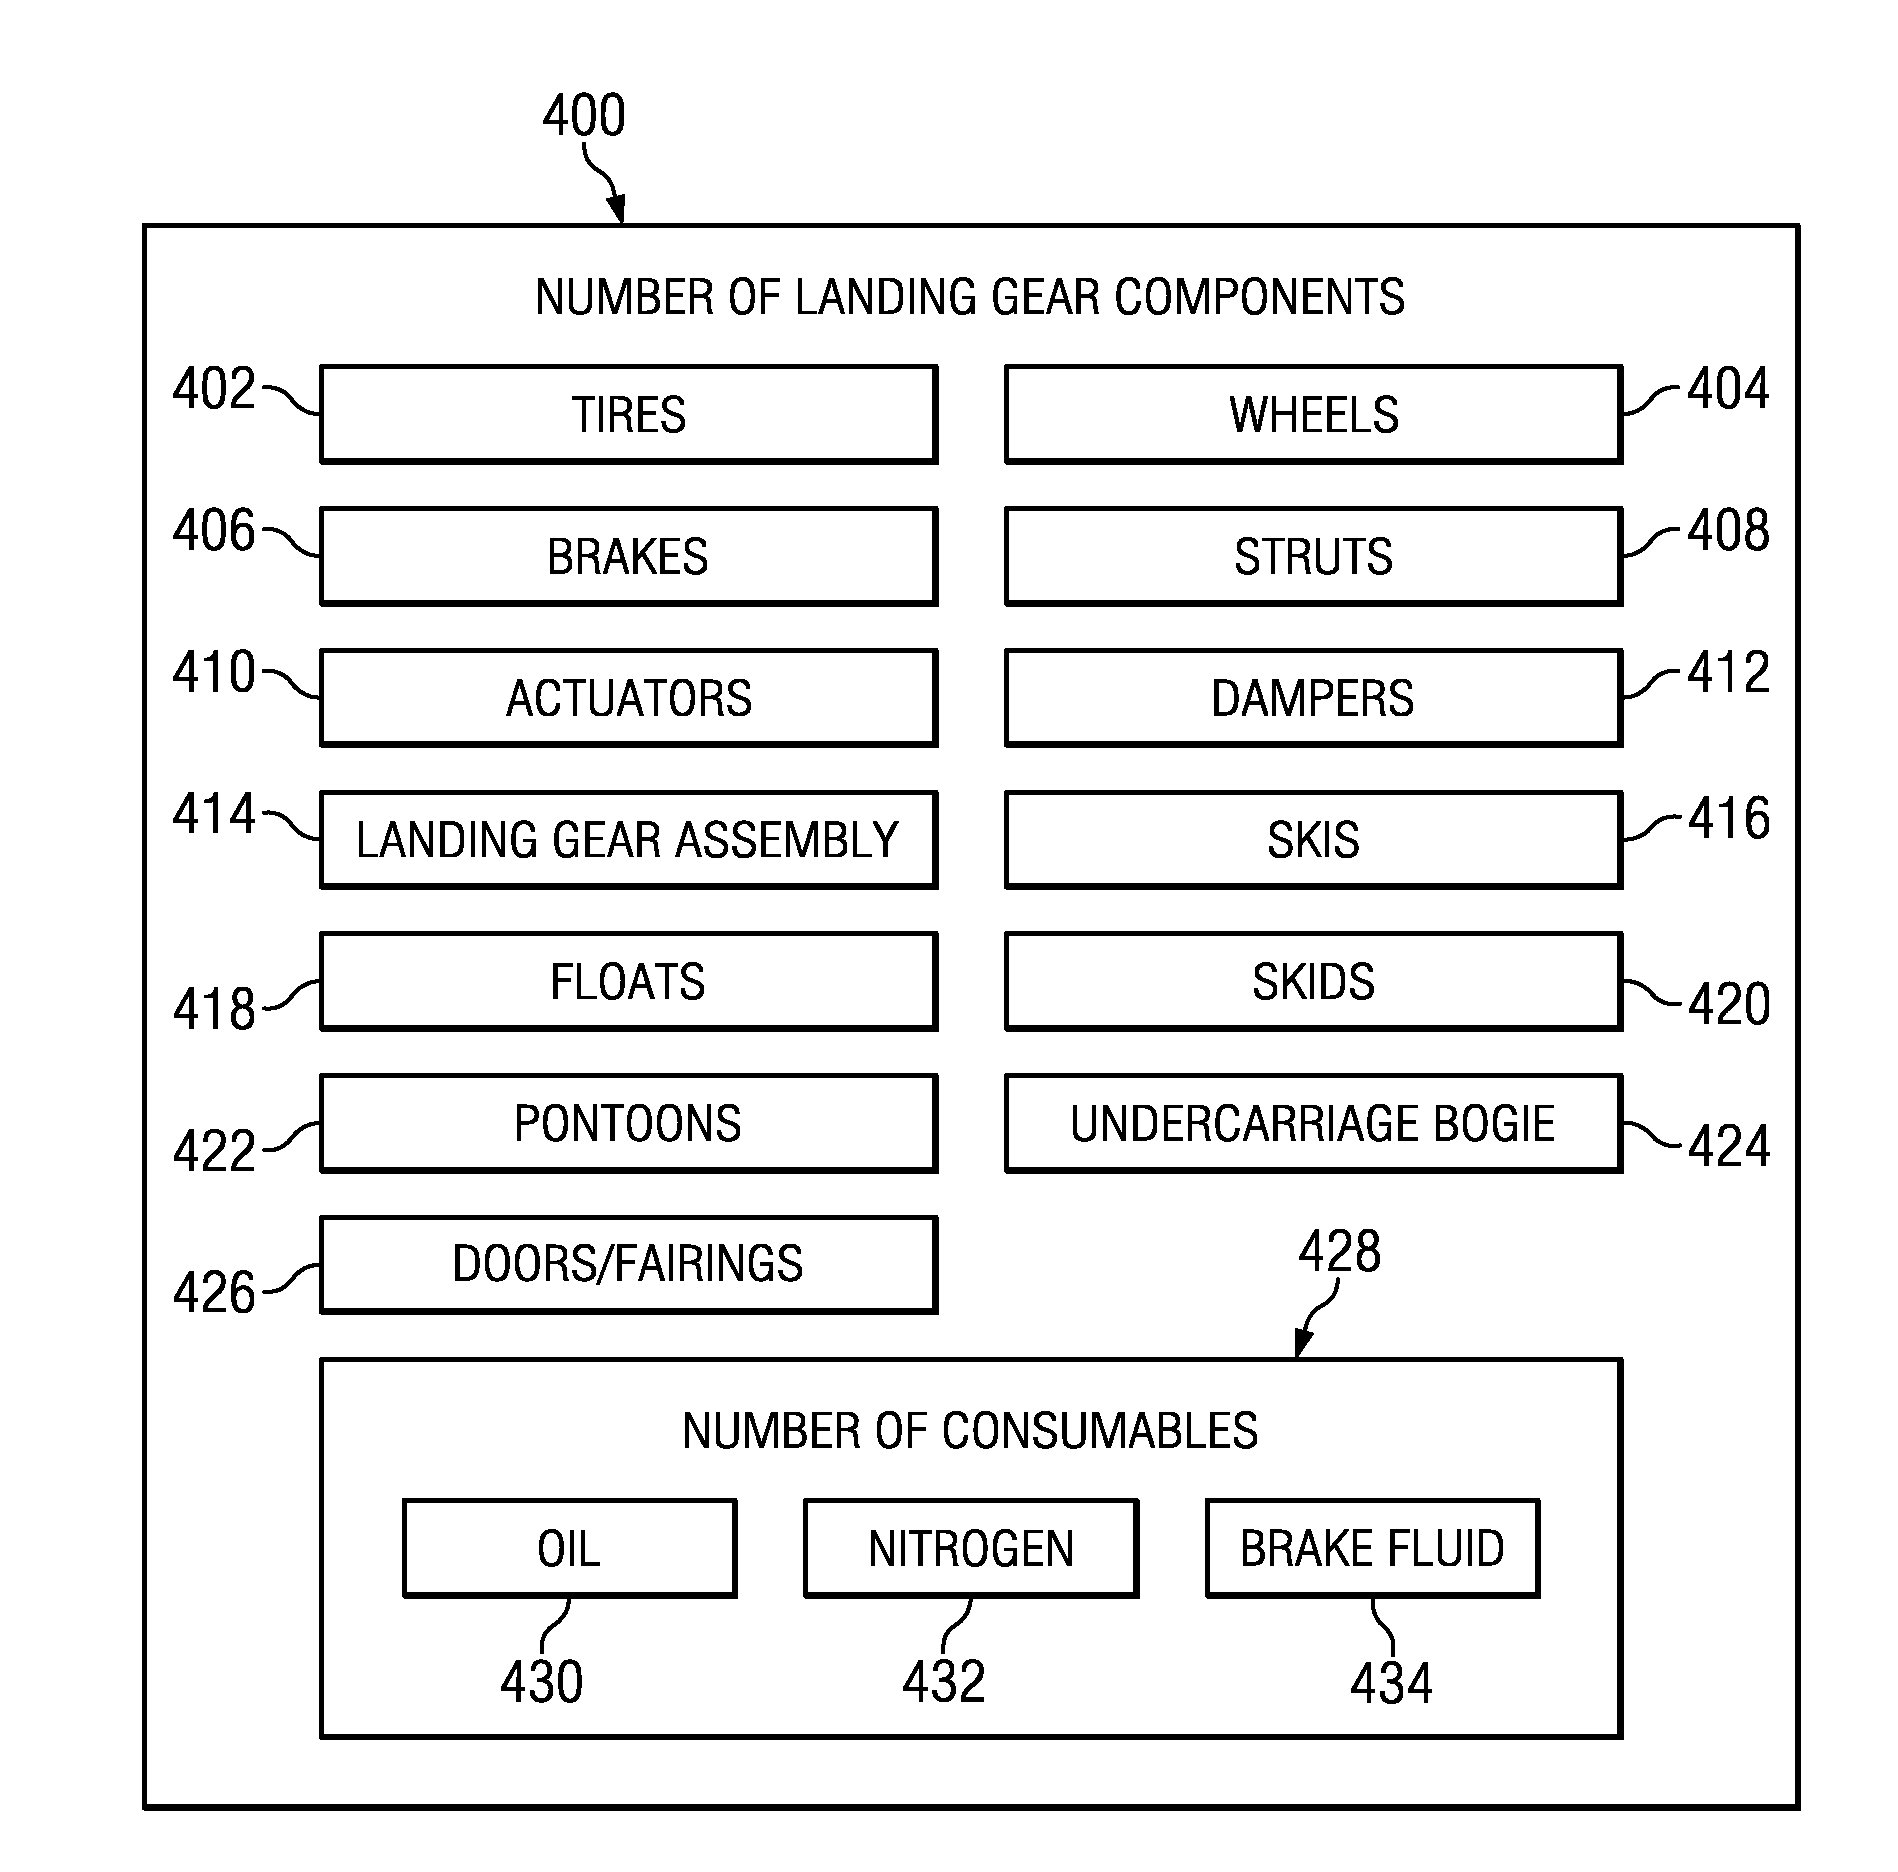 System and Method to Assess and Report the Health of Landing Gear Related Components